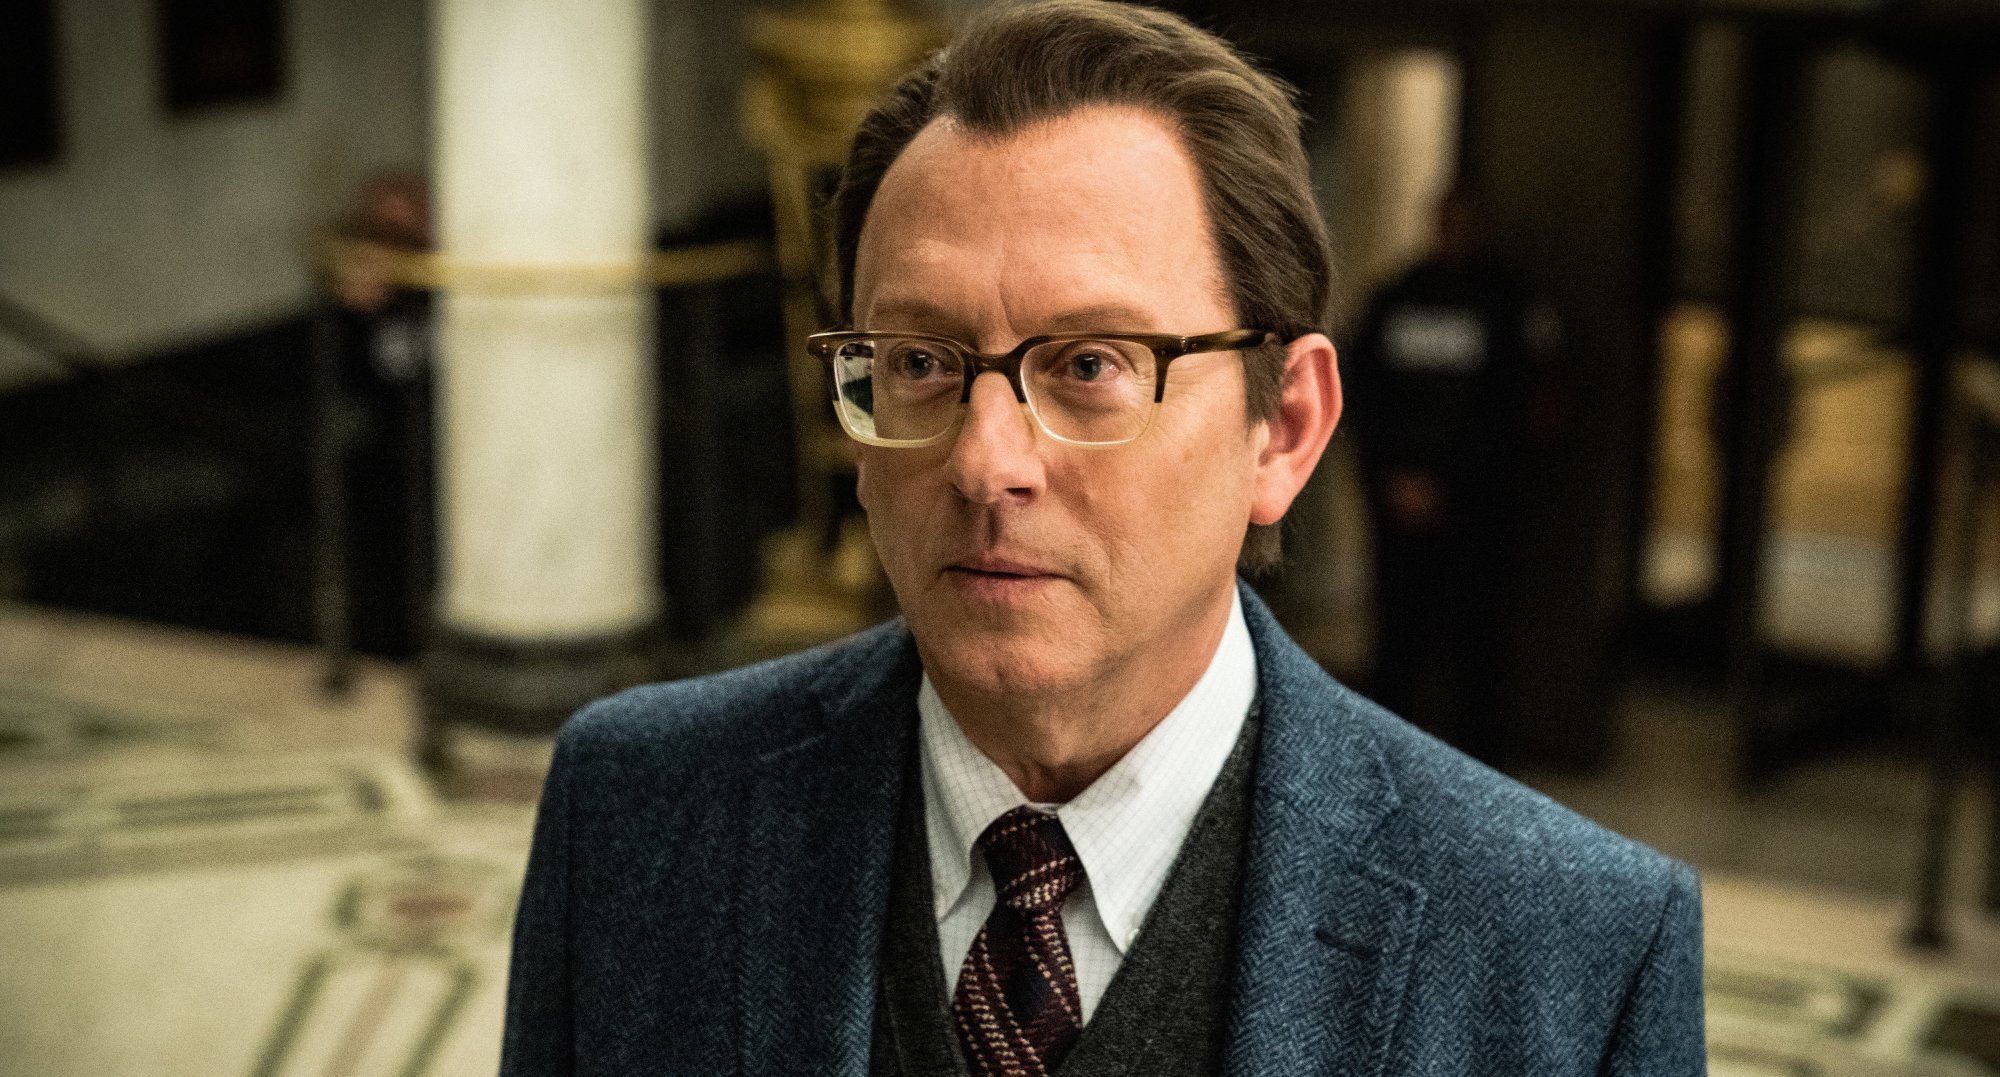 Michael Emerson as Leland Townsend in 'Evil' series.